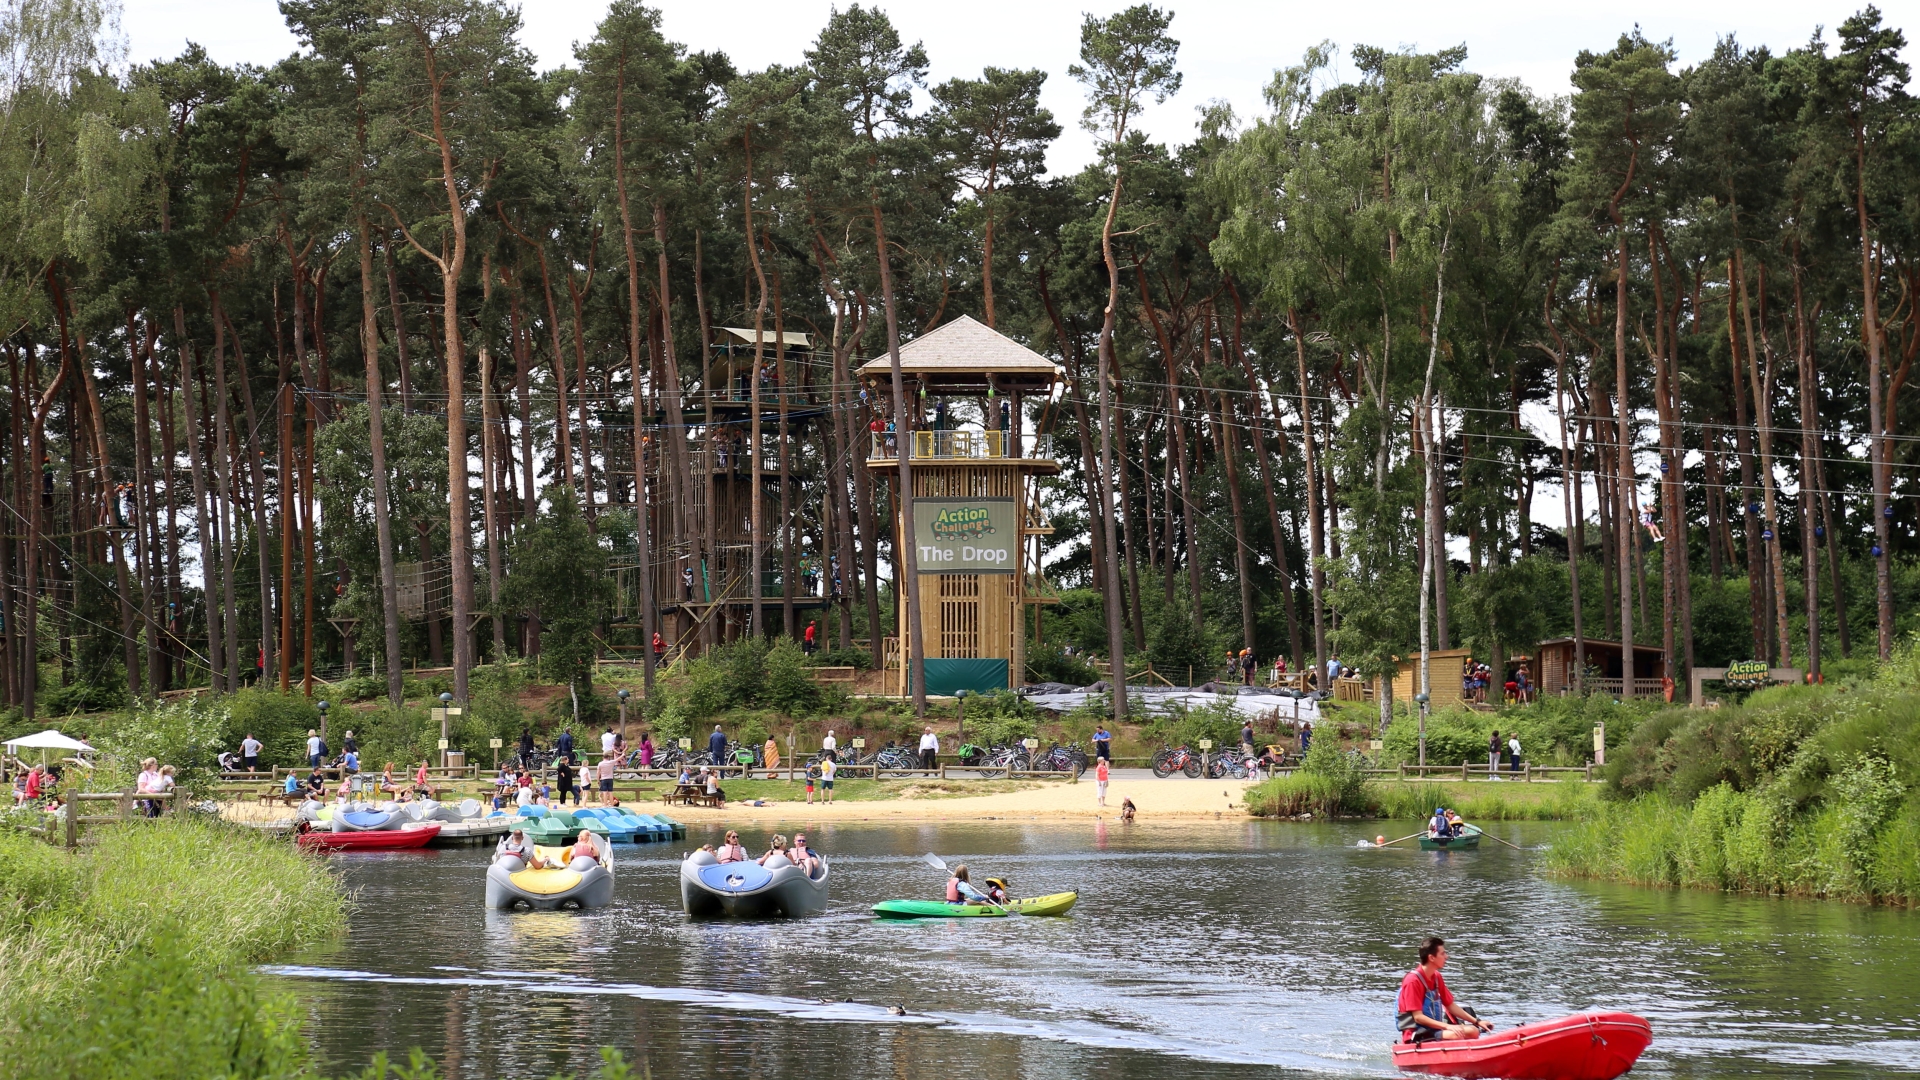 I used to work in Centre Parcs and never understood why celebs would want to visit.